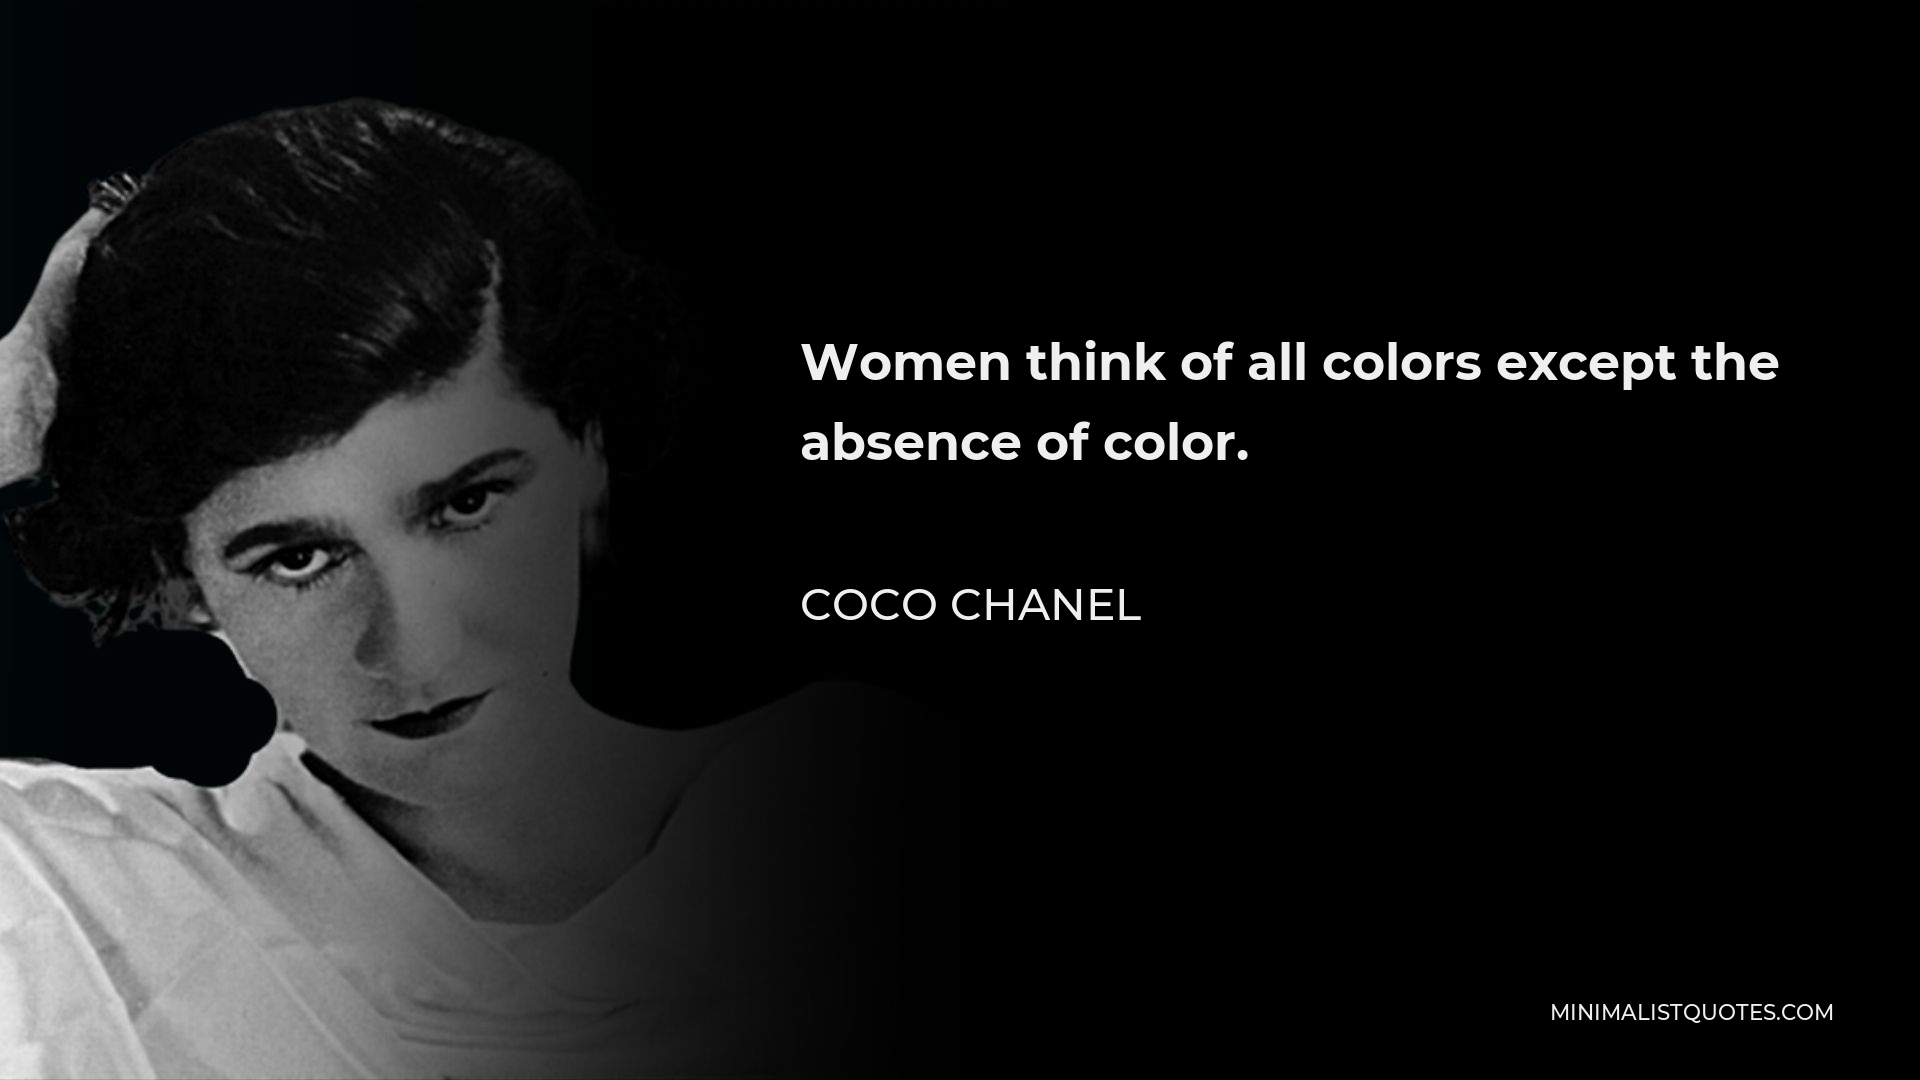 Coco Chanel Quote - Women think of all colors except the absence of color.